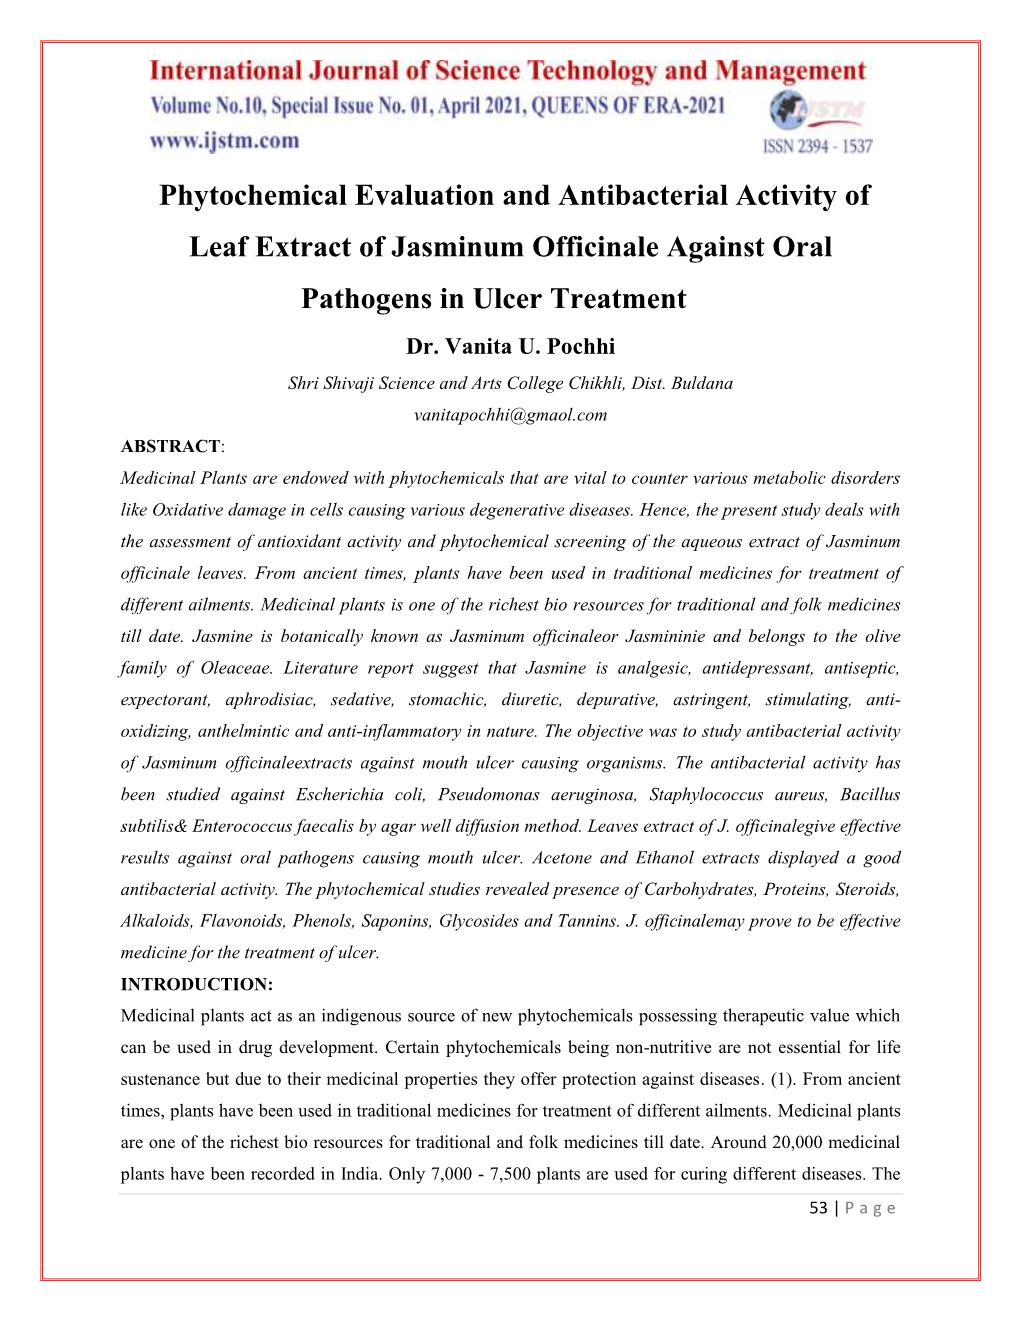 Phytochemical Evaluation and Antibacterial Activity of Leaf Extract of Jasminum Officinale Against Oral Pathogens in Ulcer Treatment Dr